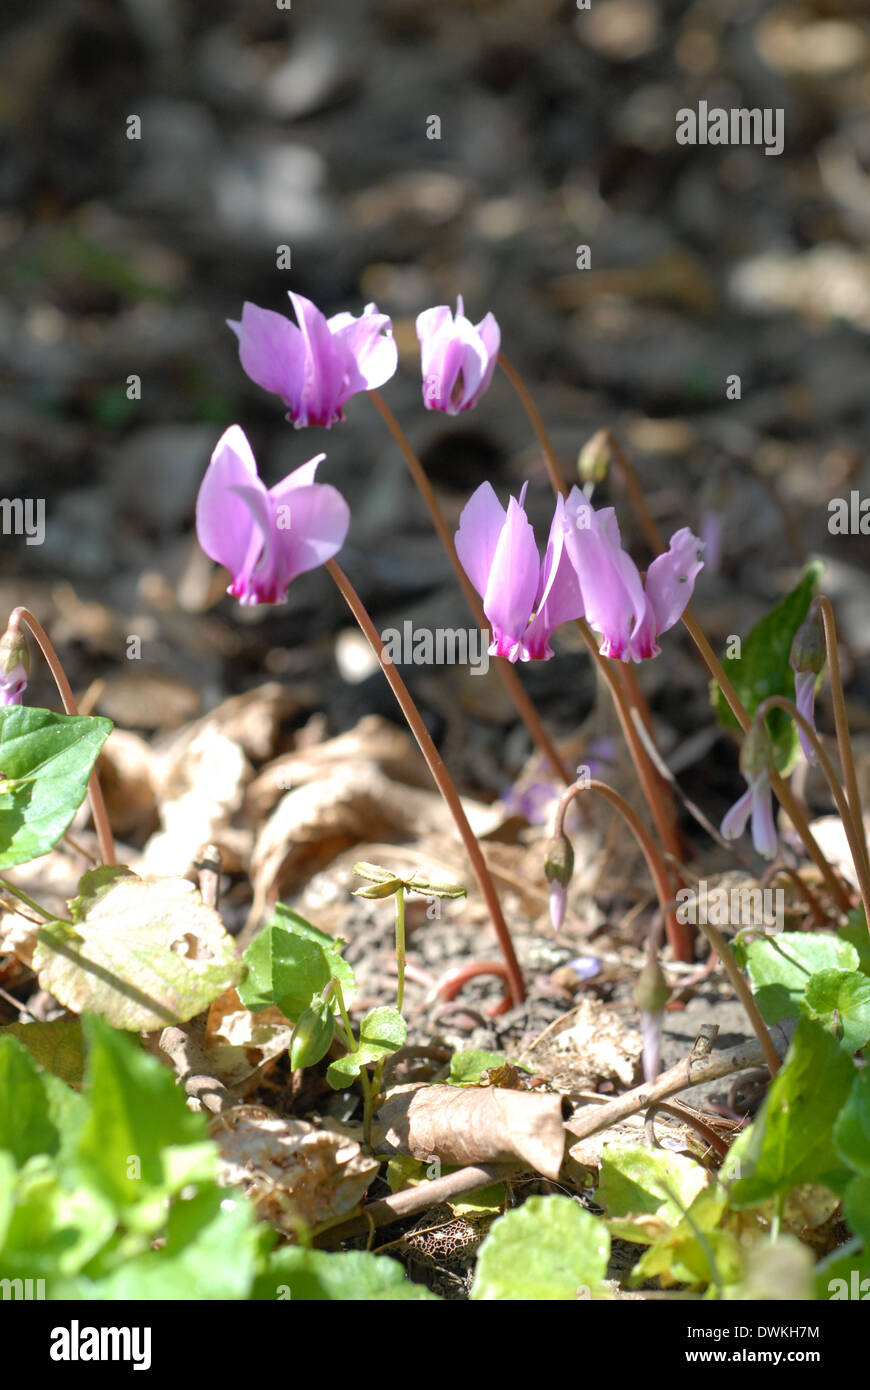 Cyclamen, flowers, growing, wild, gardening, vocation, hobbies, recreation, old age, retirement, Stock Photo